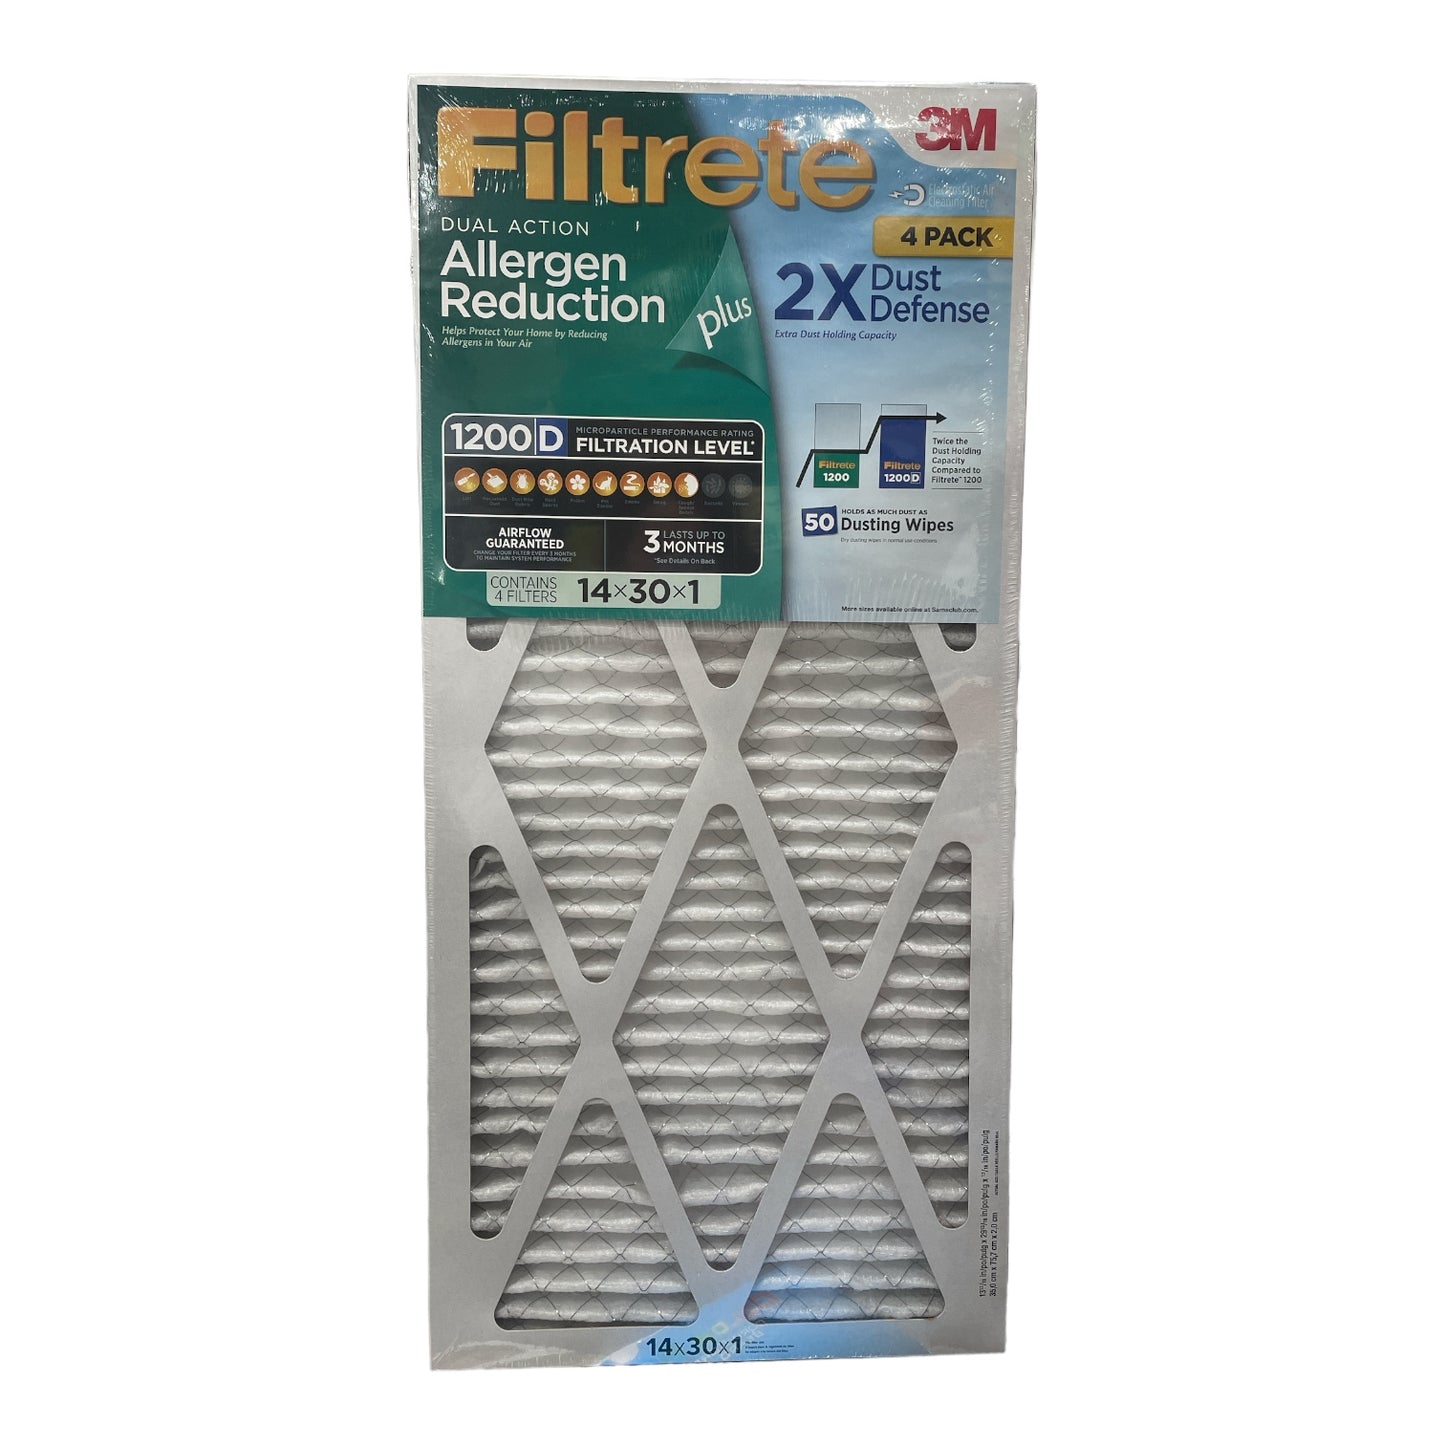 Filtrete 1200 D MPR Allergen Reduction Plus Air Cleaning Filter, 14x30x1, 4 Pack